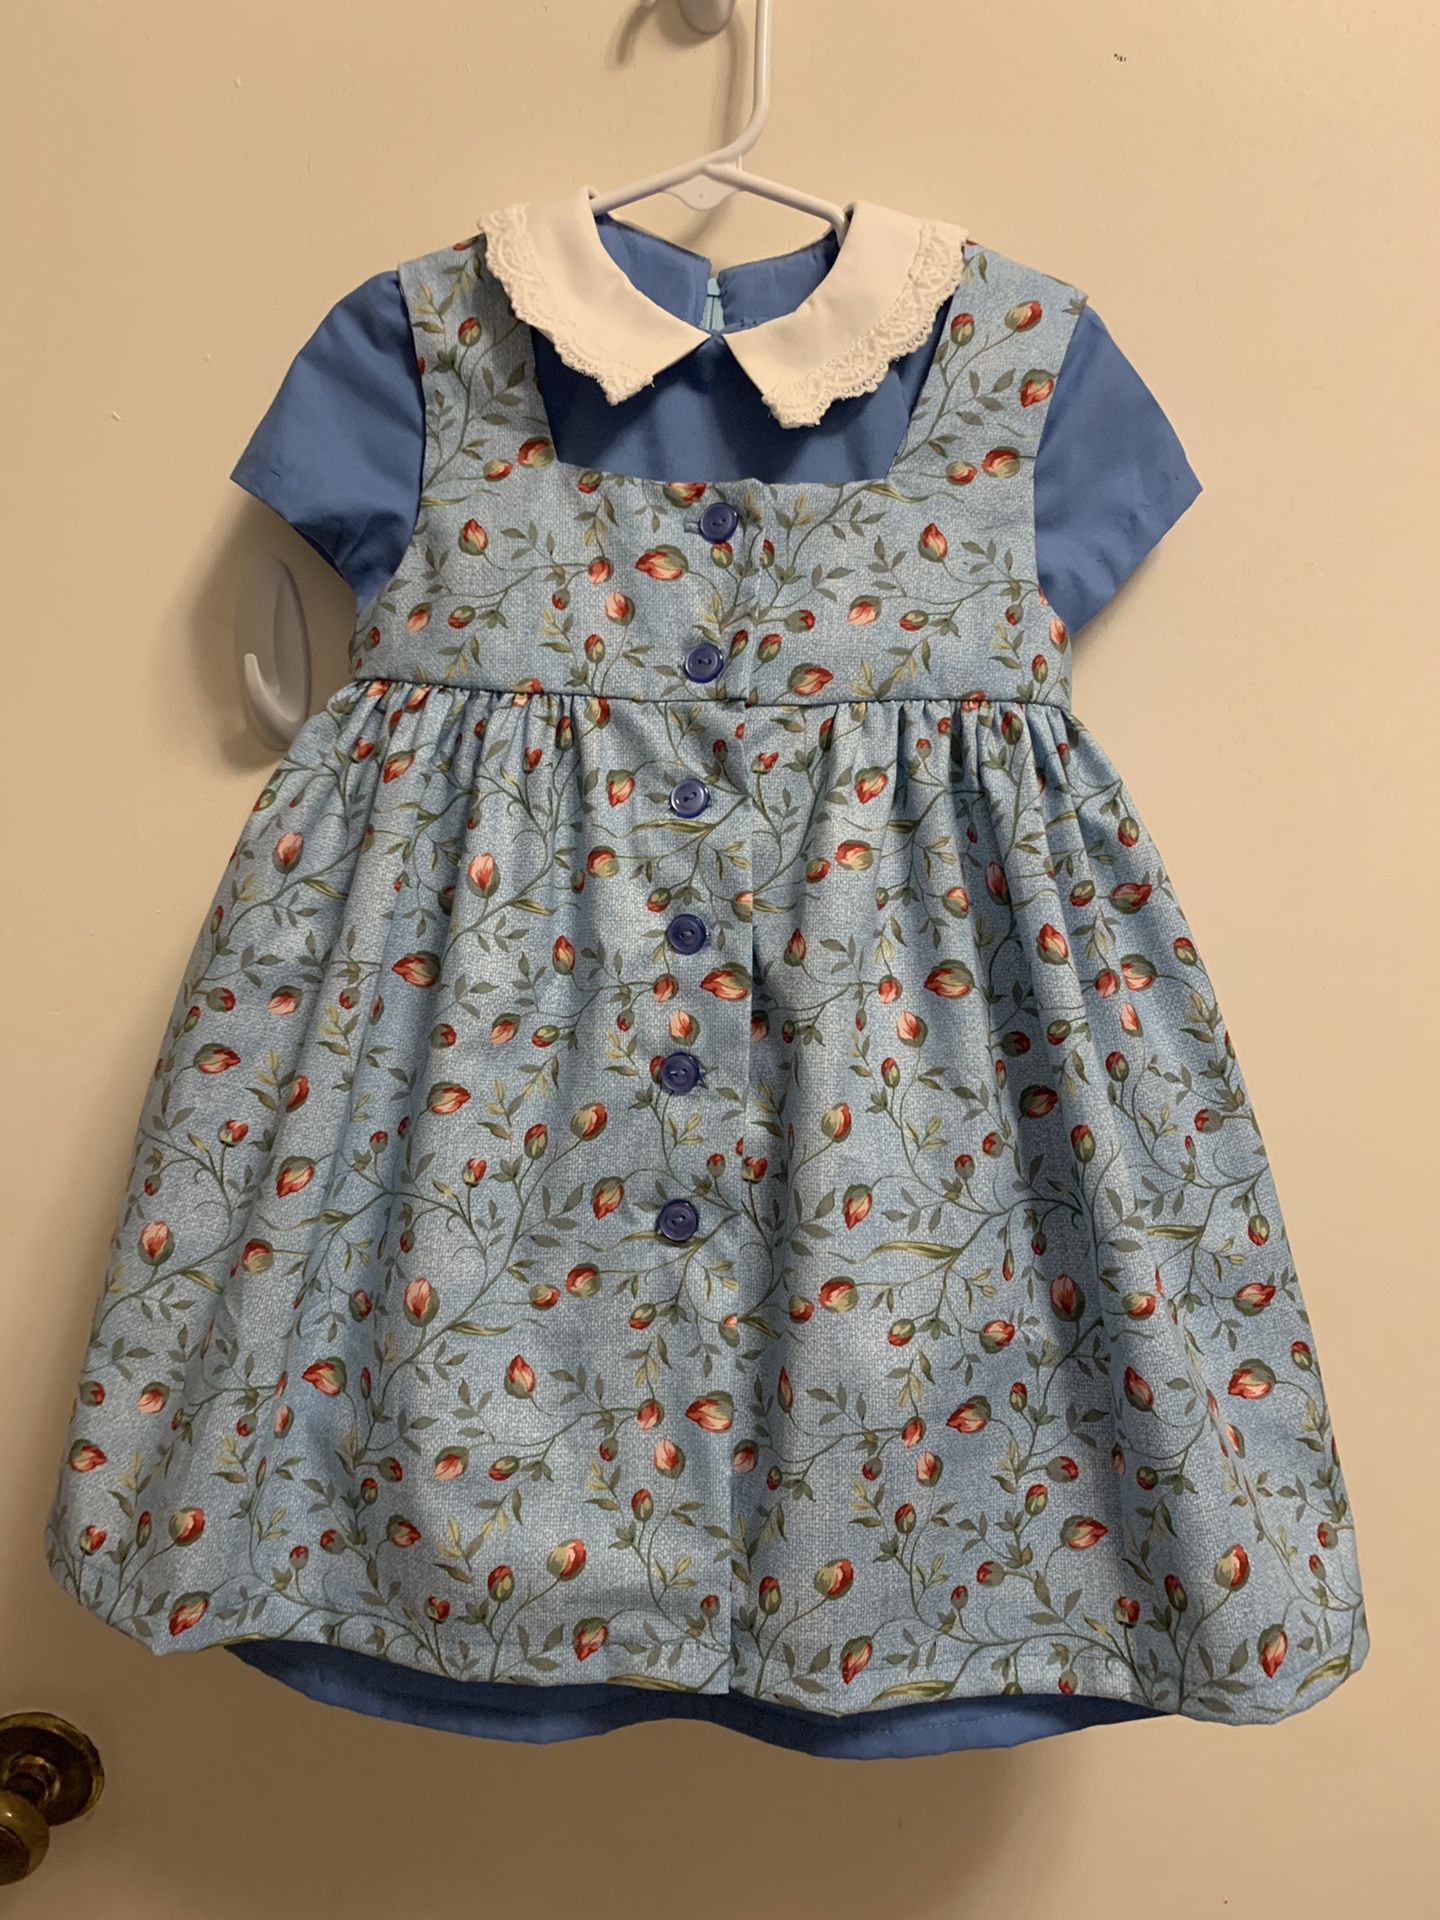 New Toddler Dress and Pinafore Size 3T 